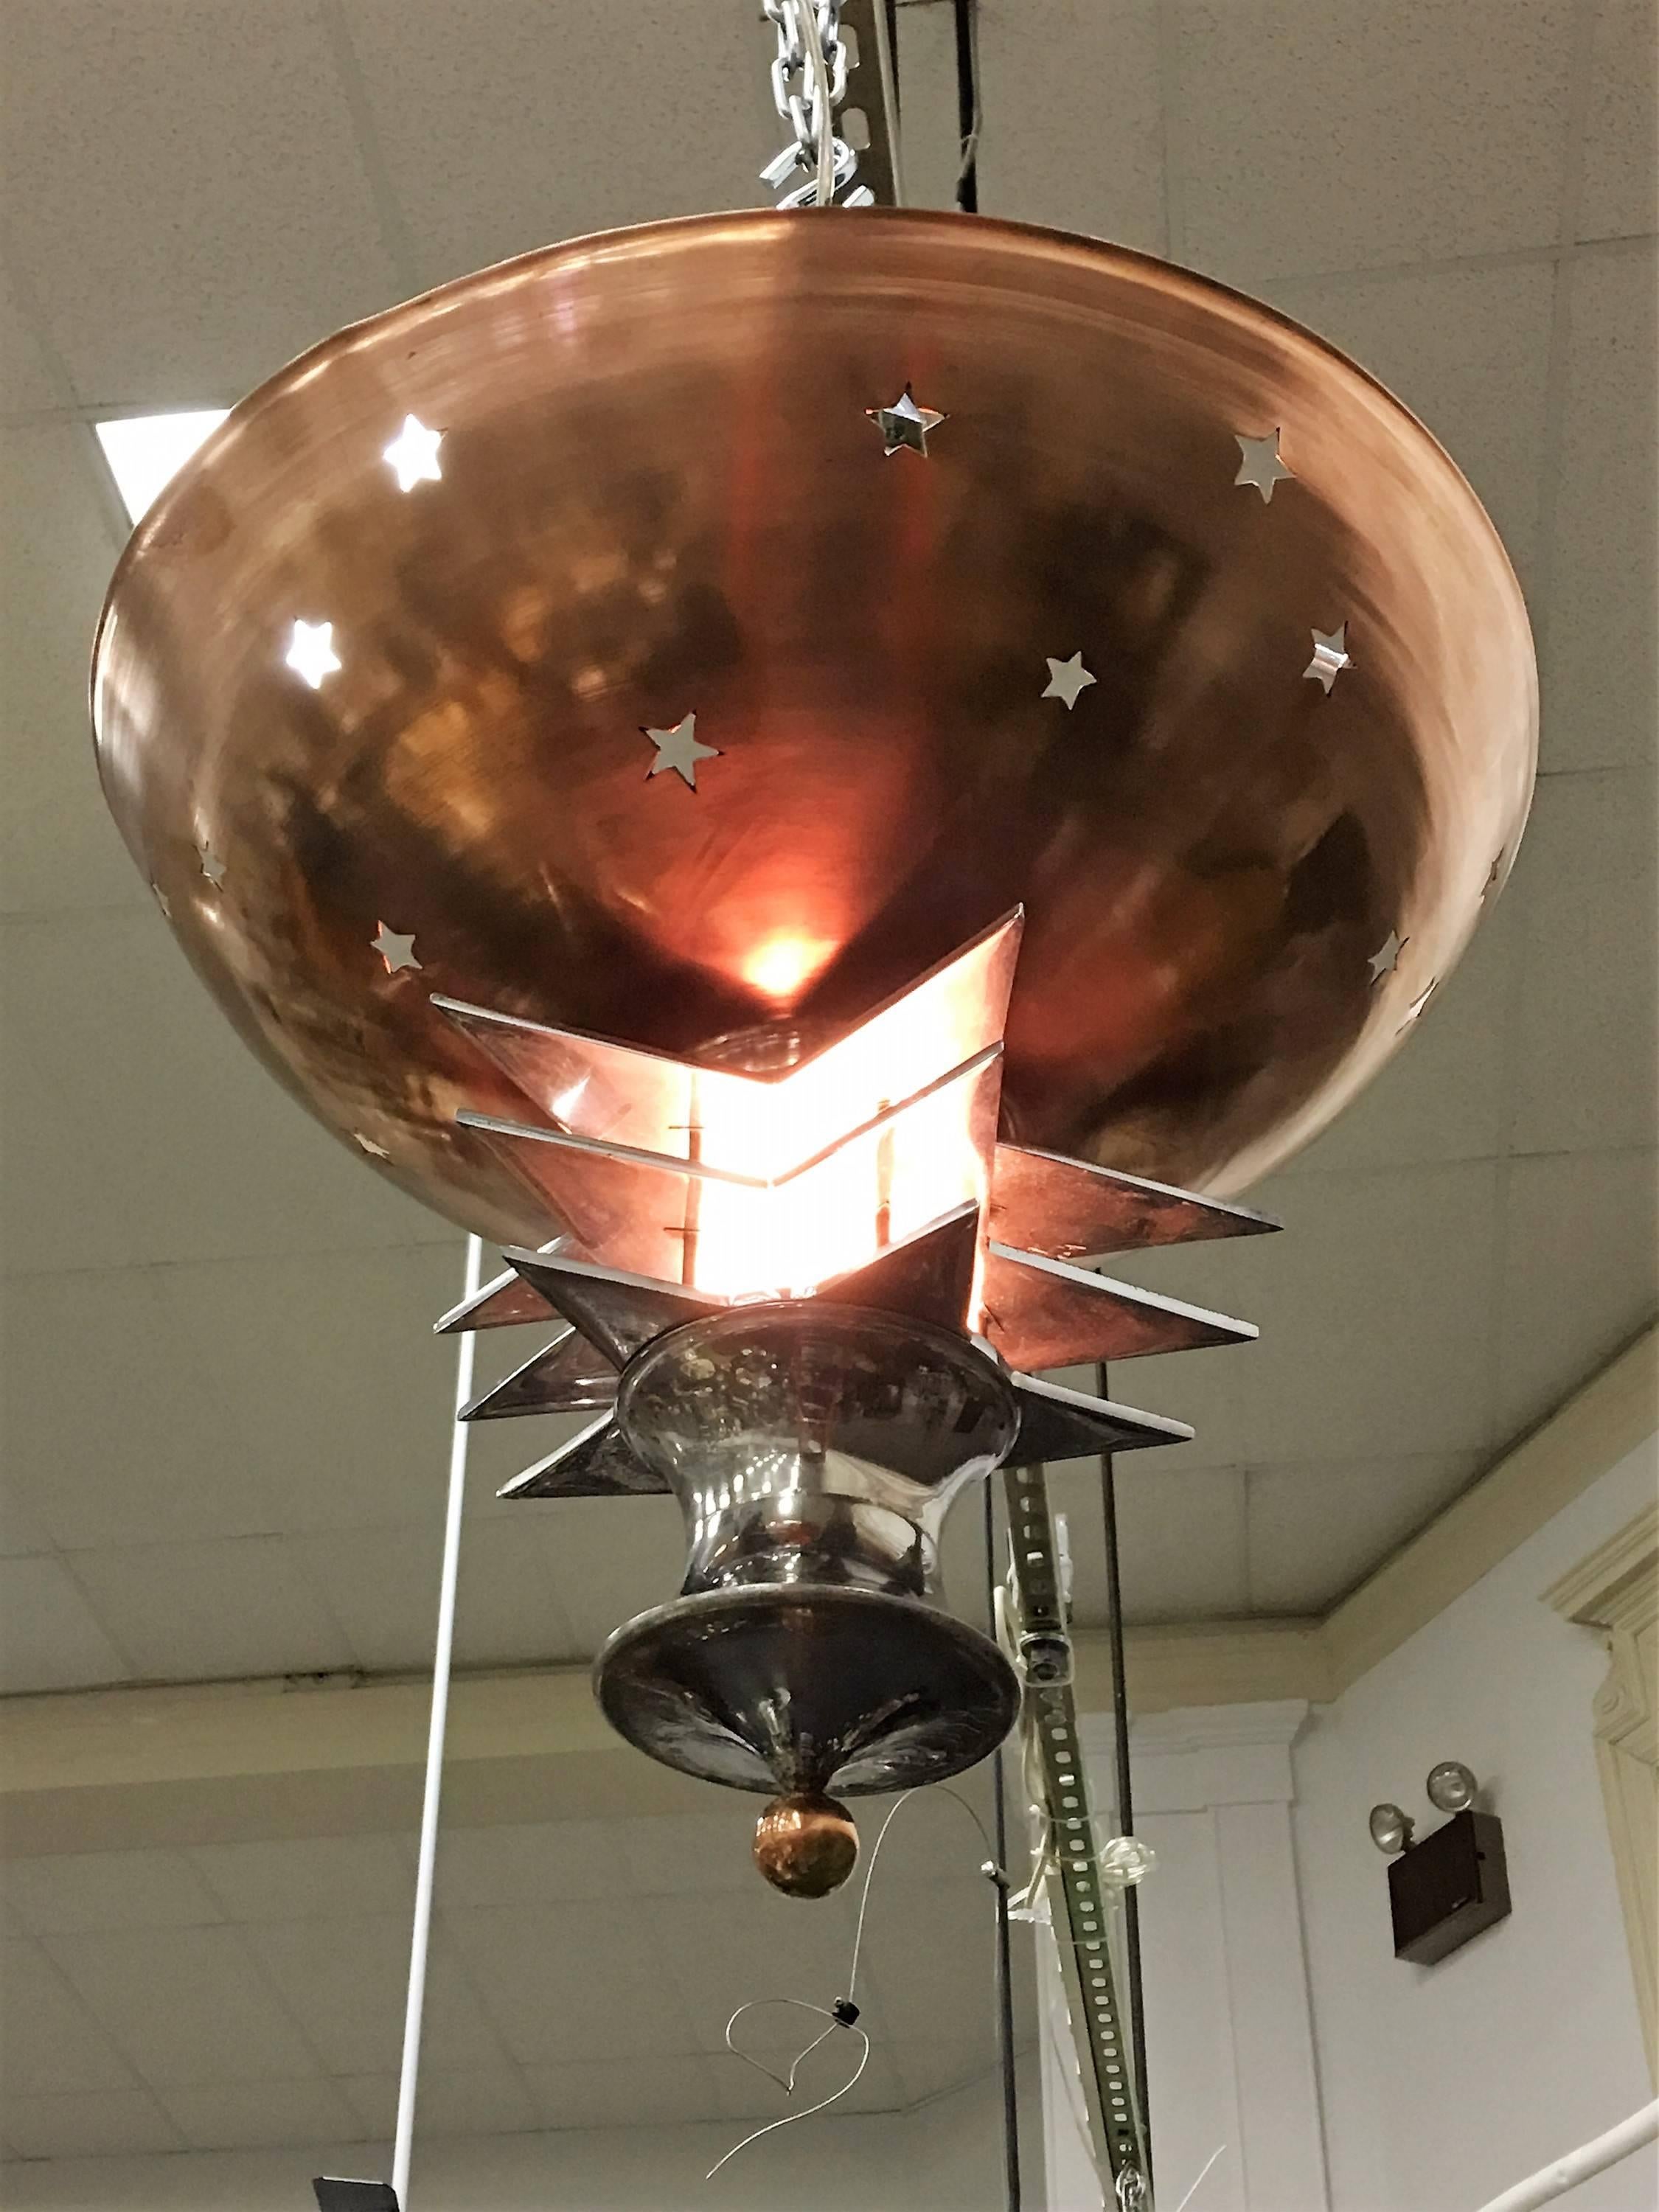 Fantastic multi dimensional copper and chrome finished art deco chandelier with a full four sided chrome star on top and a copper star studded cut-out bowl .Stacked chrome stars forms complete the base, milk glass shade covers the light fixture